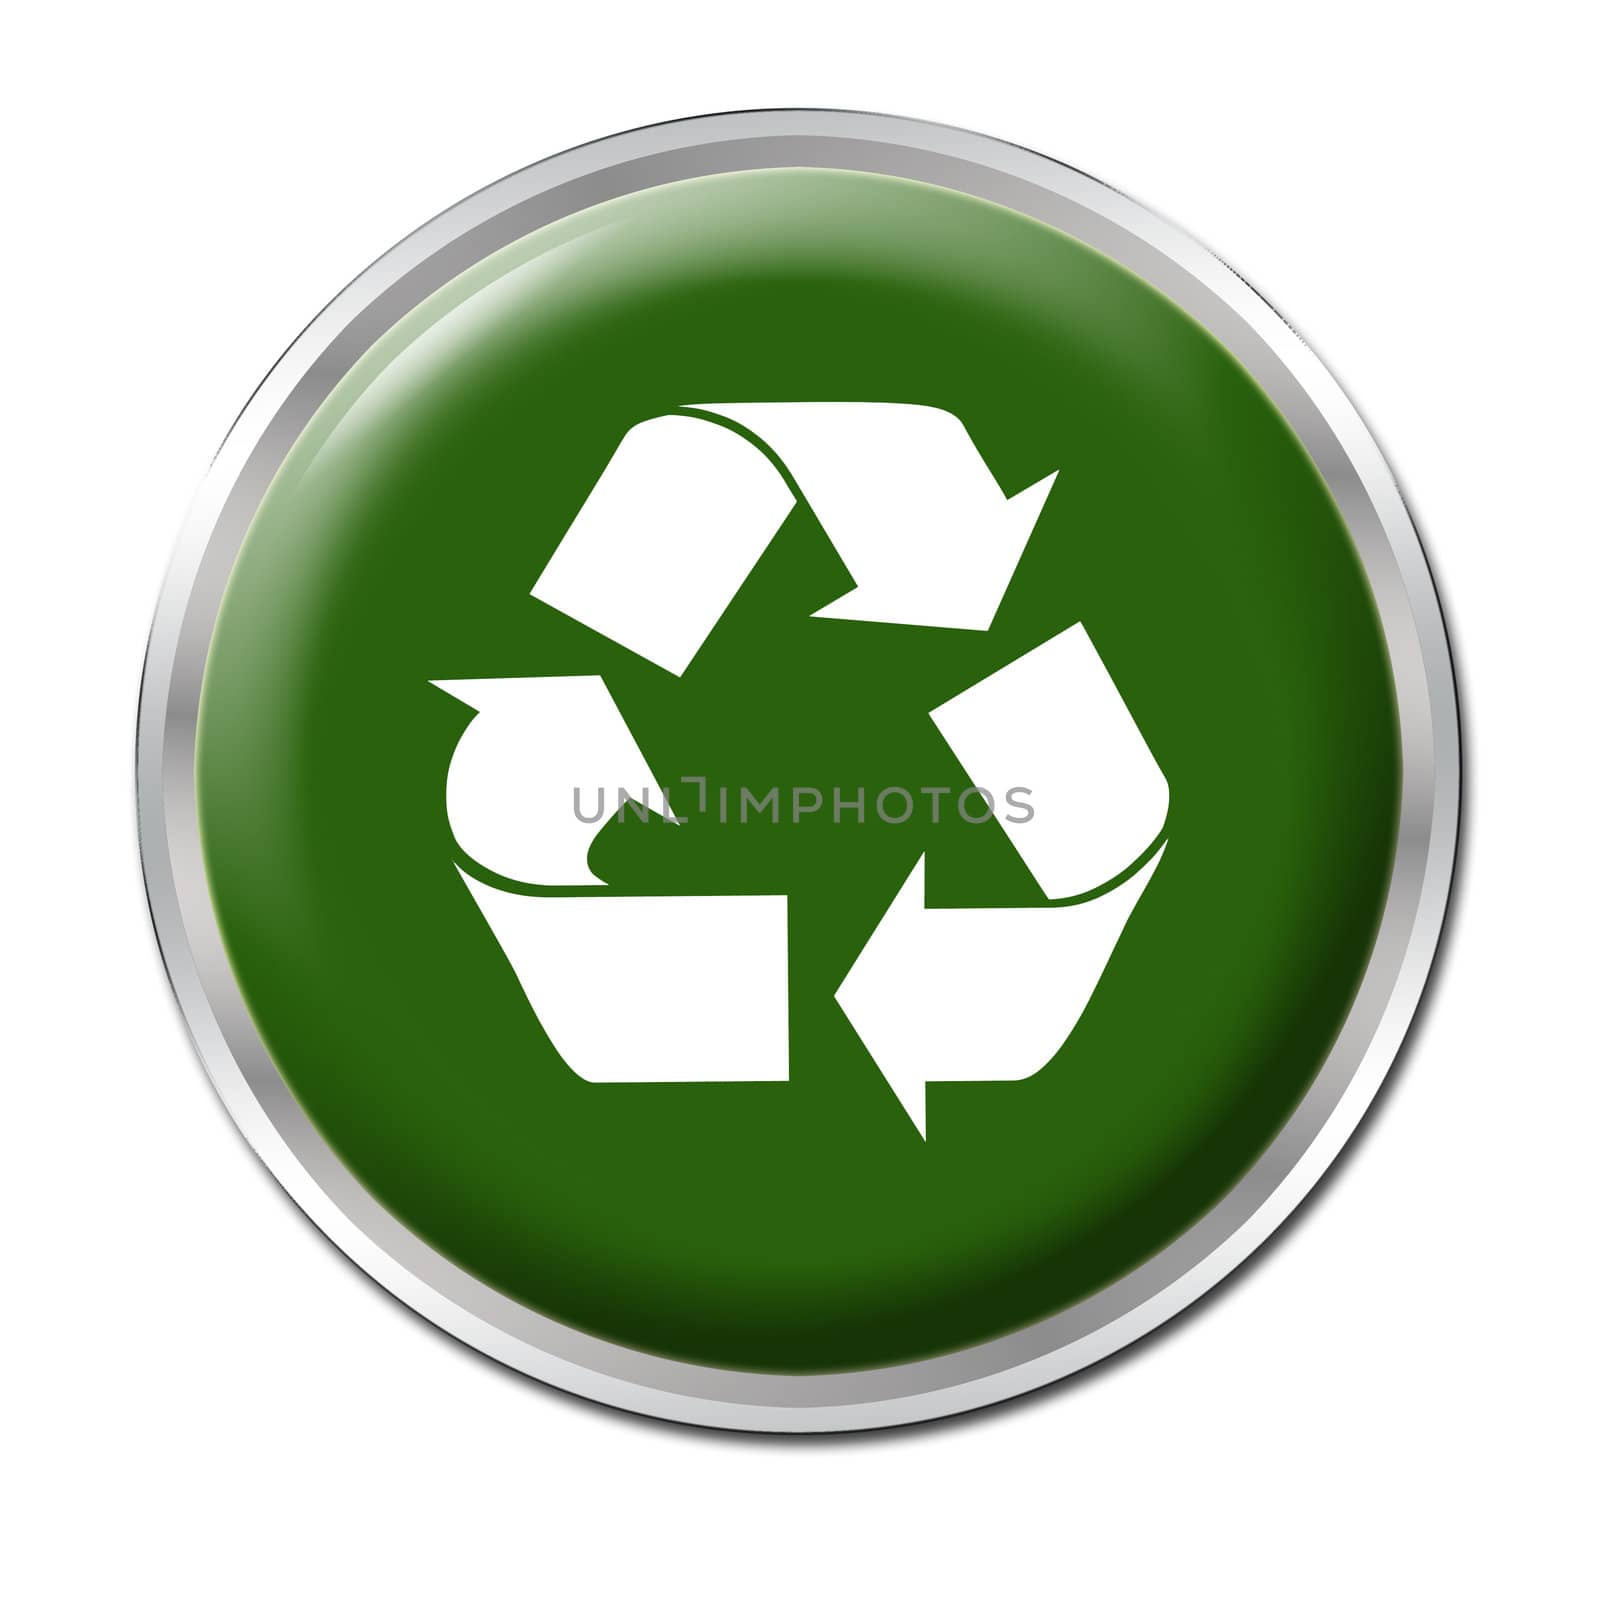 Green button with the symbol for recycling